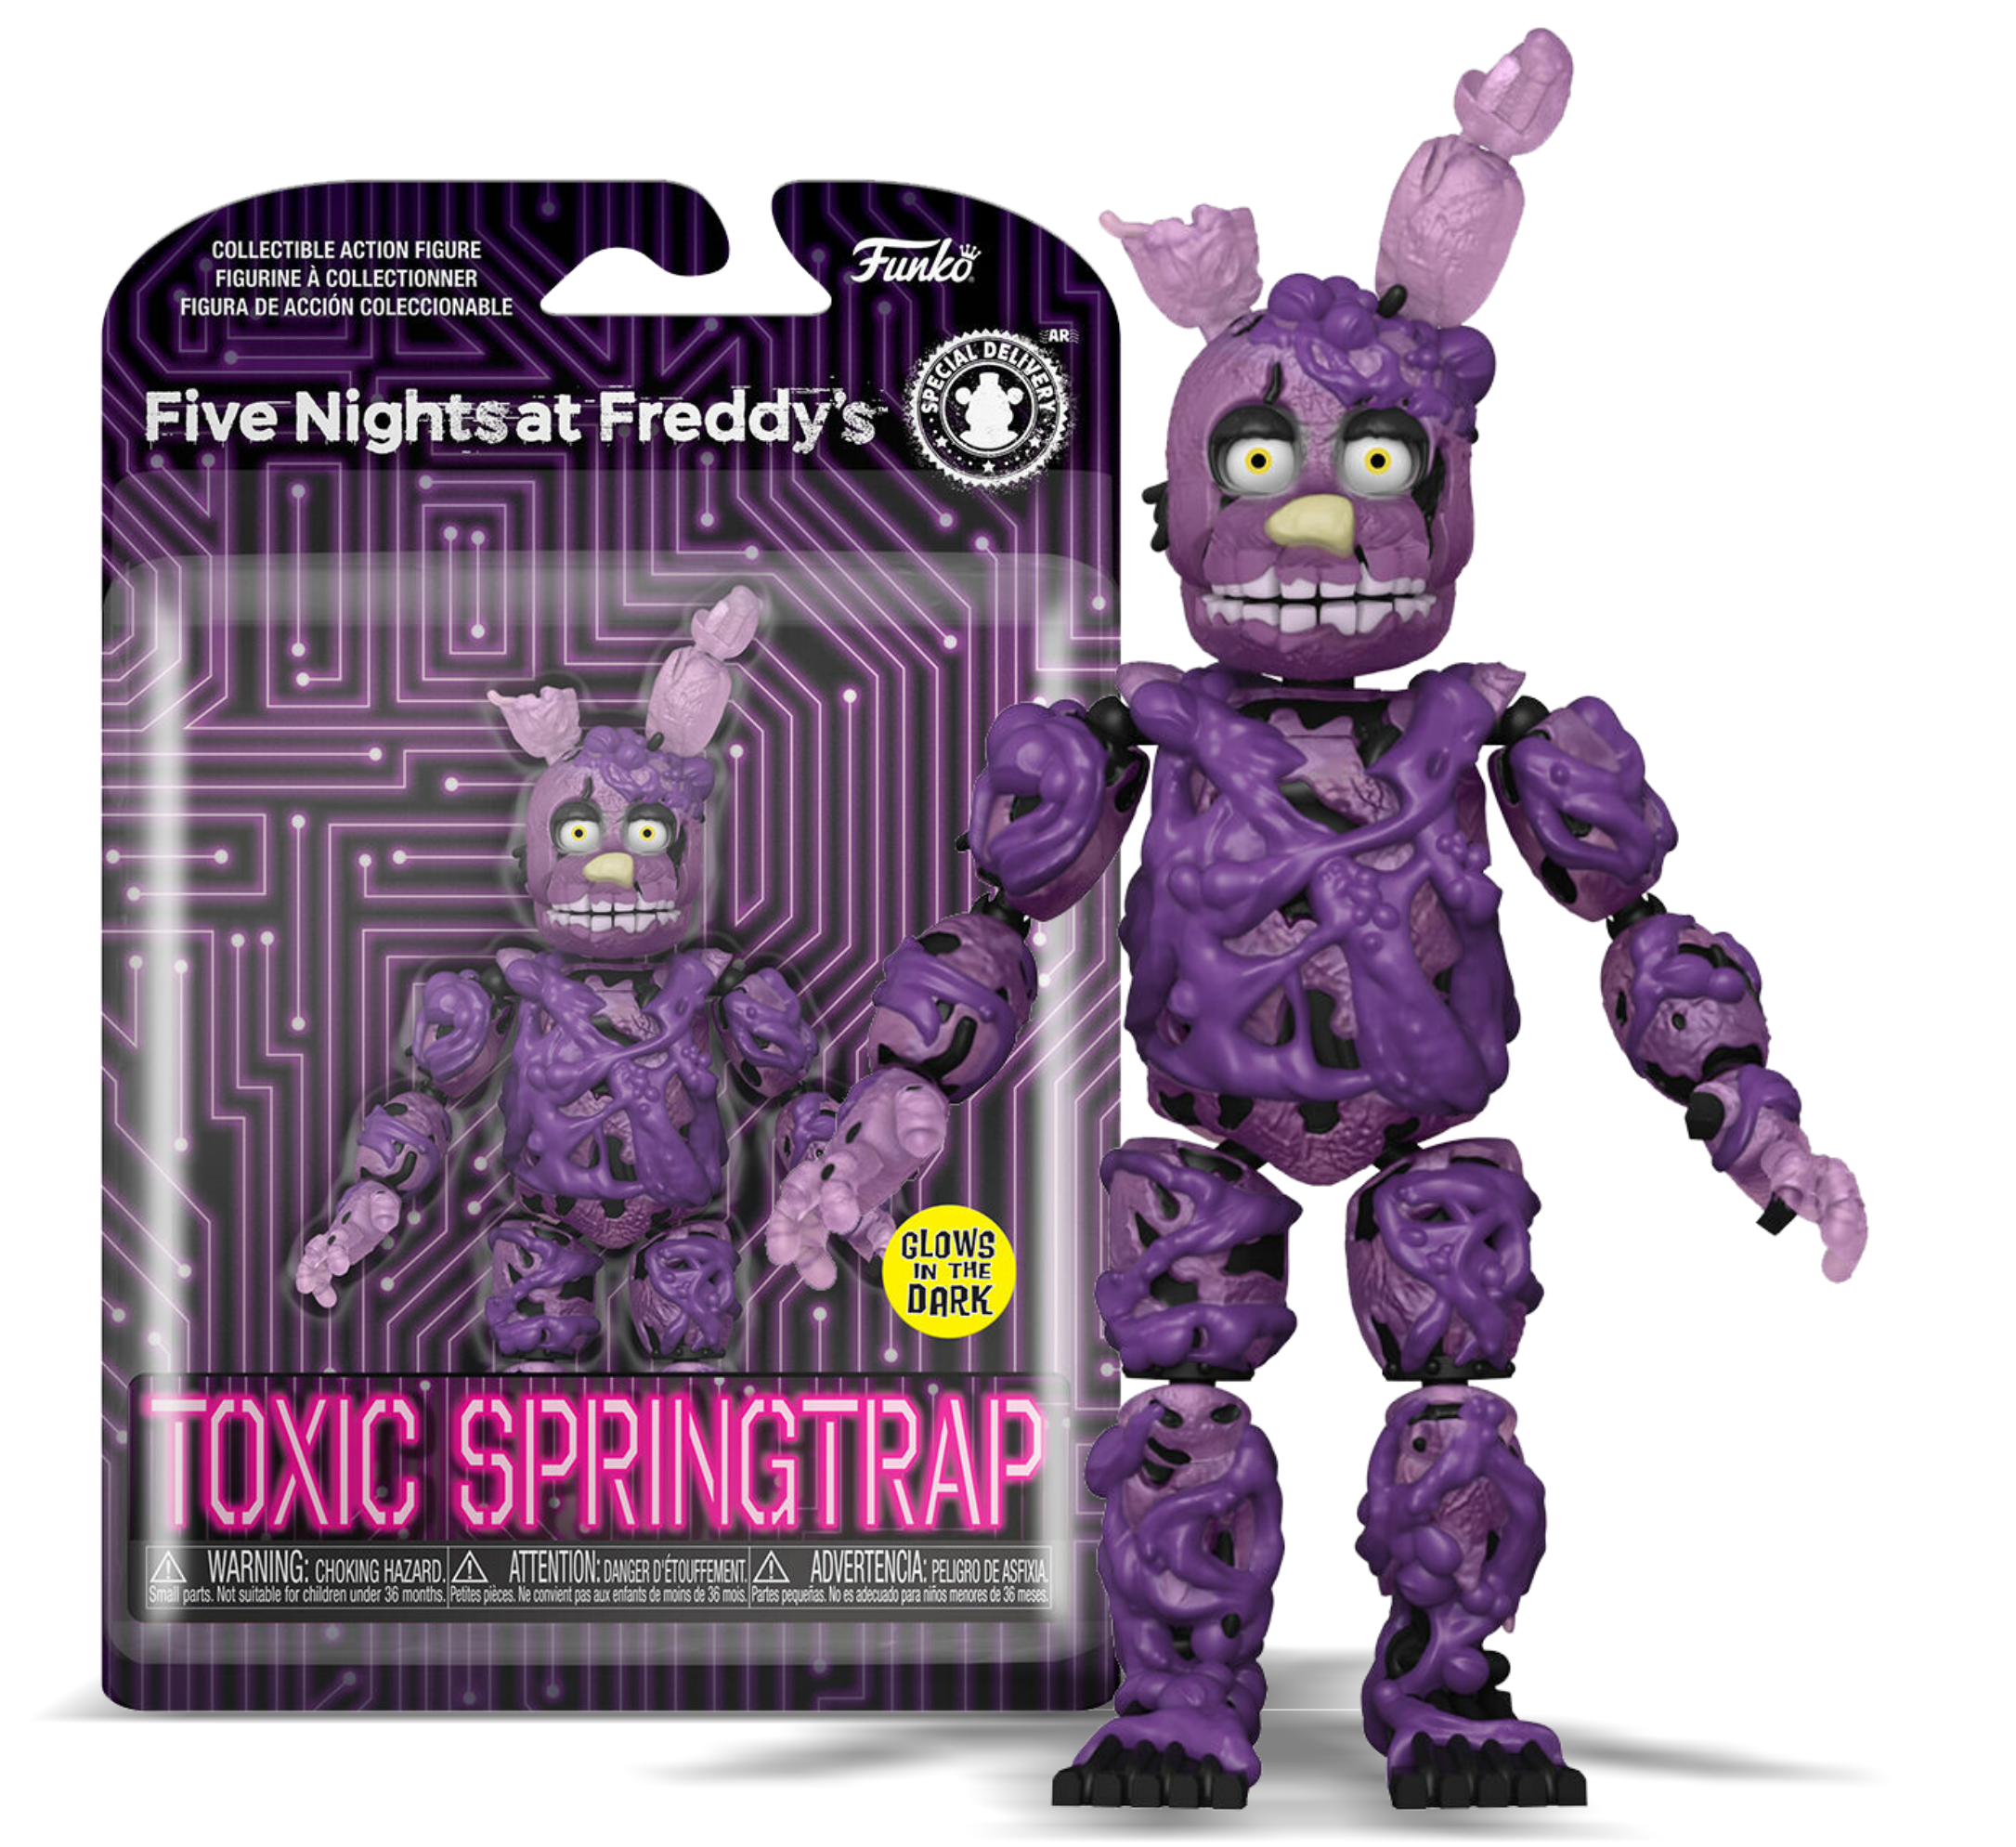 Five Nights at Freddy’s - Springtrap Tie Dye Action Figure